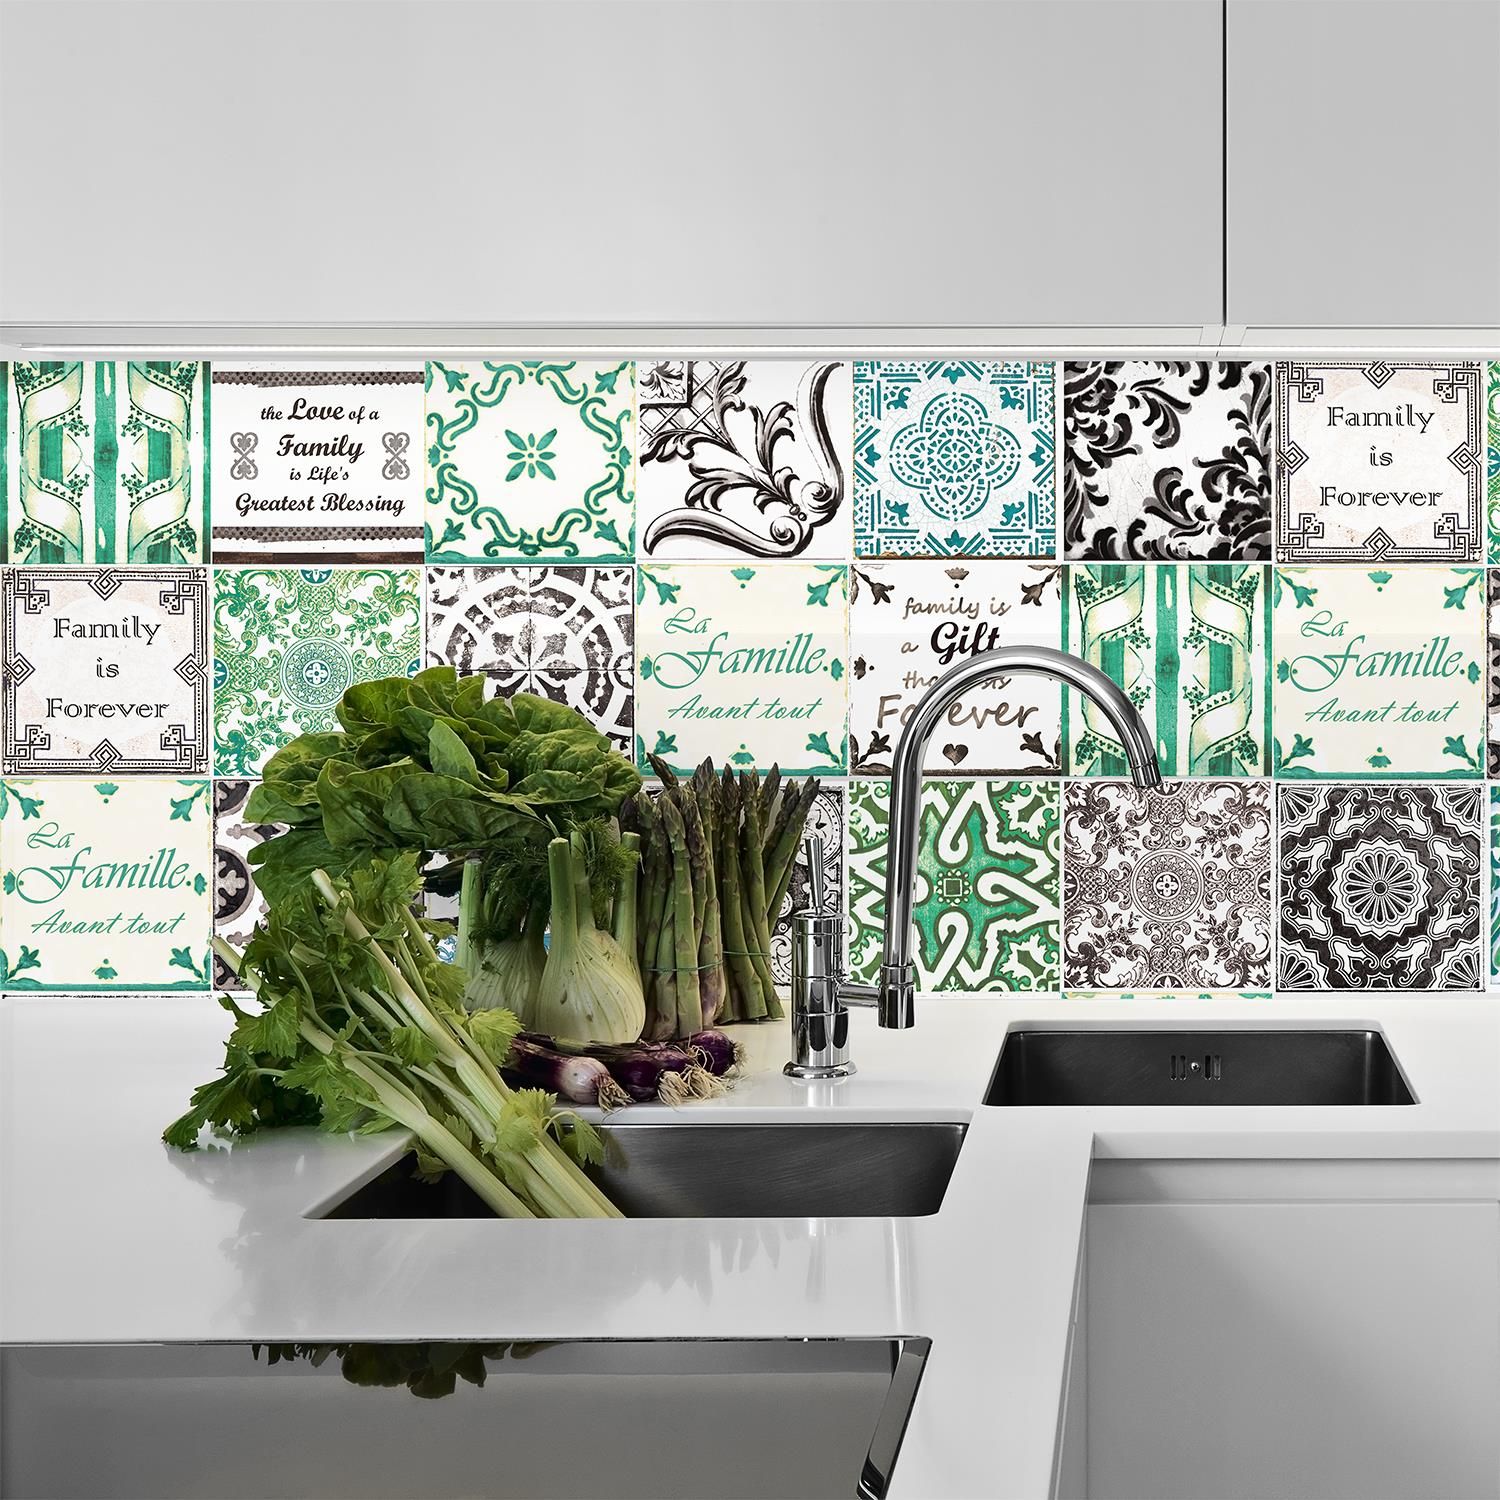 - Leave nothing to chance with our finely hand selected tiled stickers, that ensure the maximum allure for your desired home update. 
- The green and blue palate is simple enough to blend with your other decor accessories, or to be bold and beautiful on its lonesome! 
- One time installation of the quality Walplus stickers promises that after you attach it to your clean, dry wall, all that's left to do is enjoy your home's new look!
- Package Contains:  48 pieces of stickers 15 x 15 cm and a free pack of 3in1 application tools is included. Coverage area: 1.08m2.